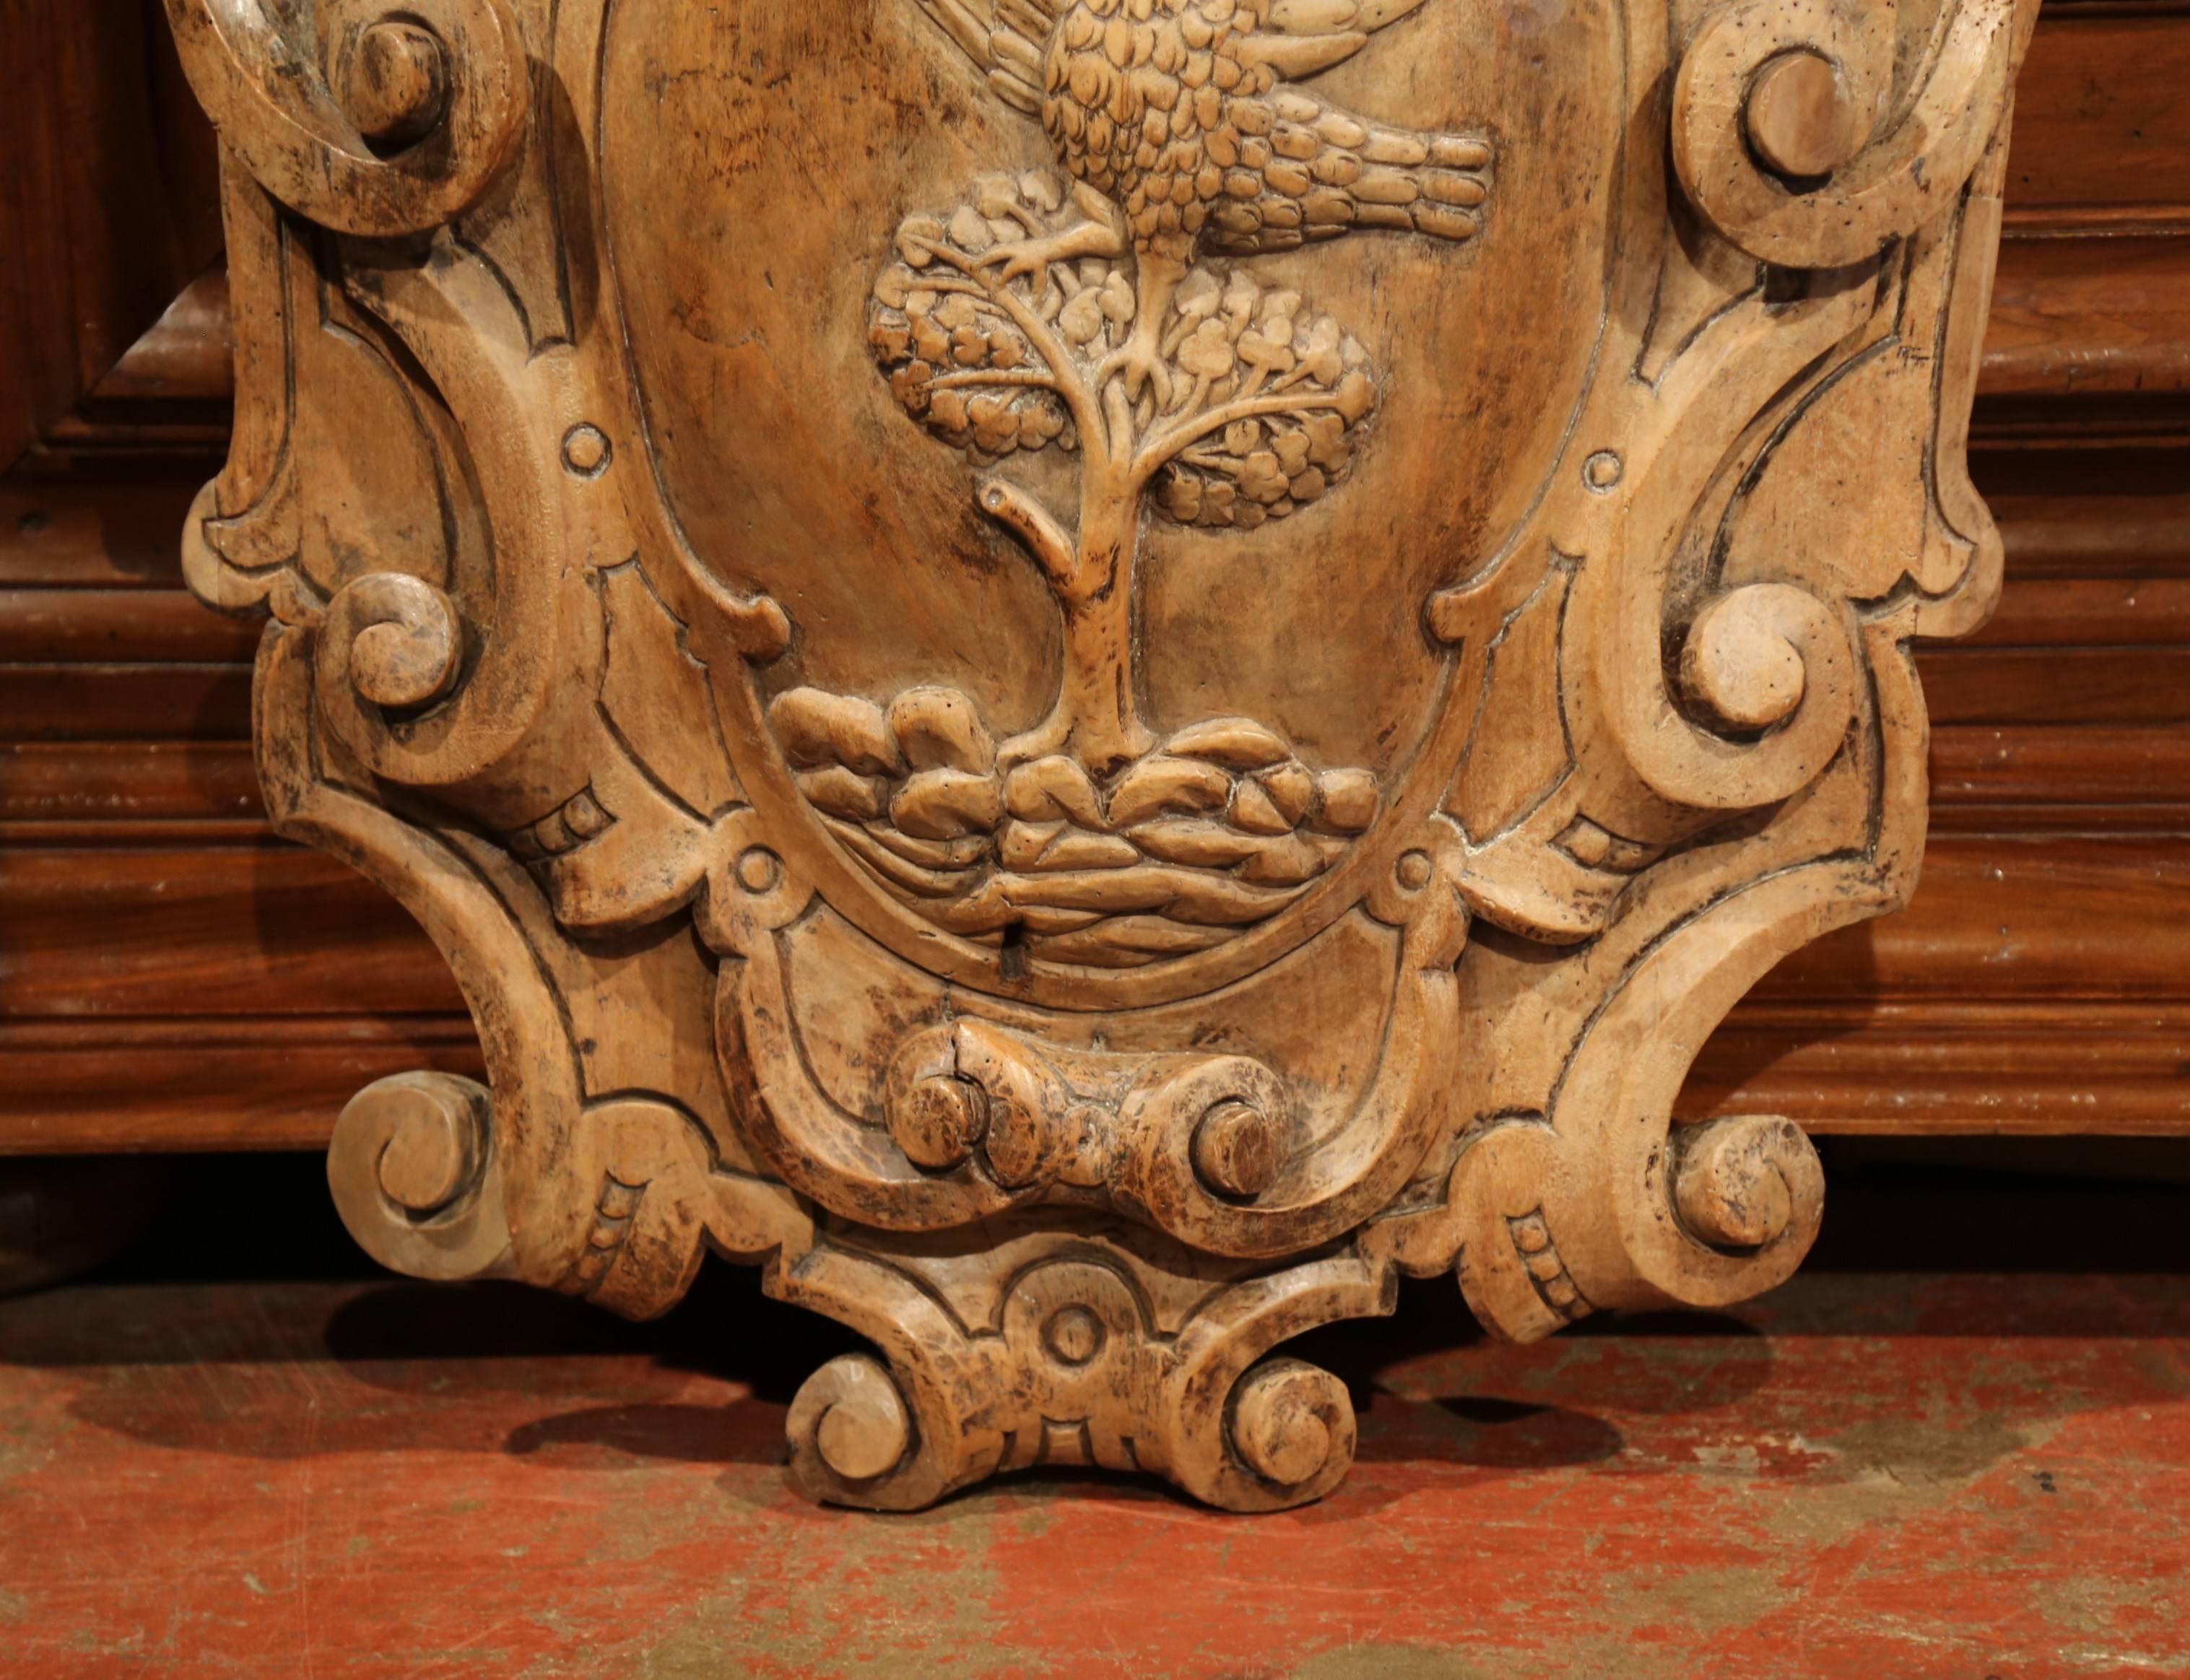 Hand-Carved 18th Century French Hand Carved Walnut Wall Carving with Bird, Tree and Cherub